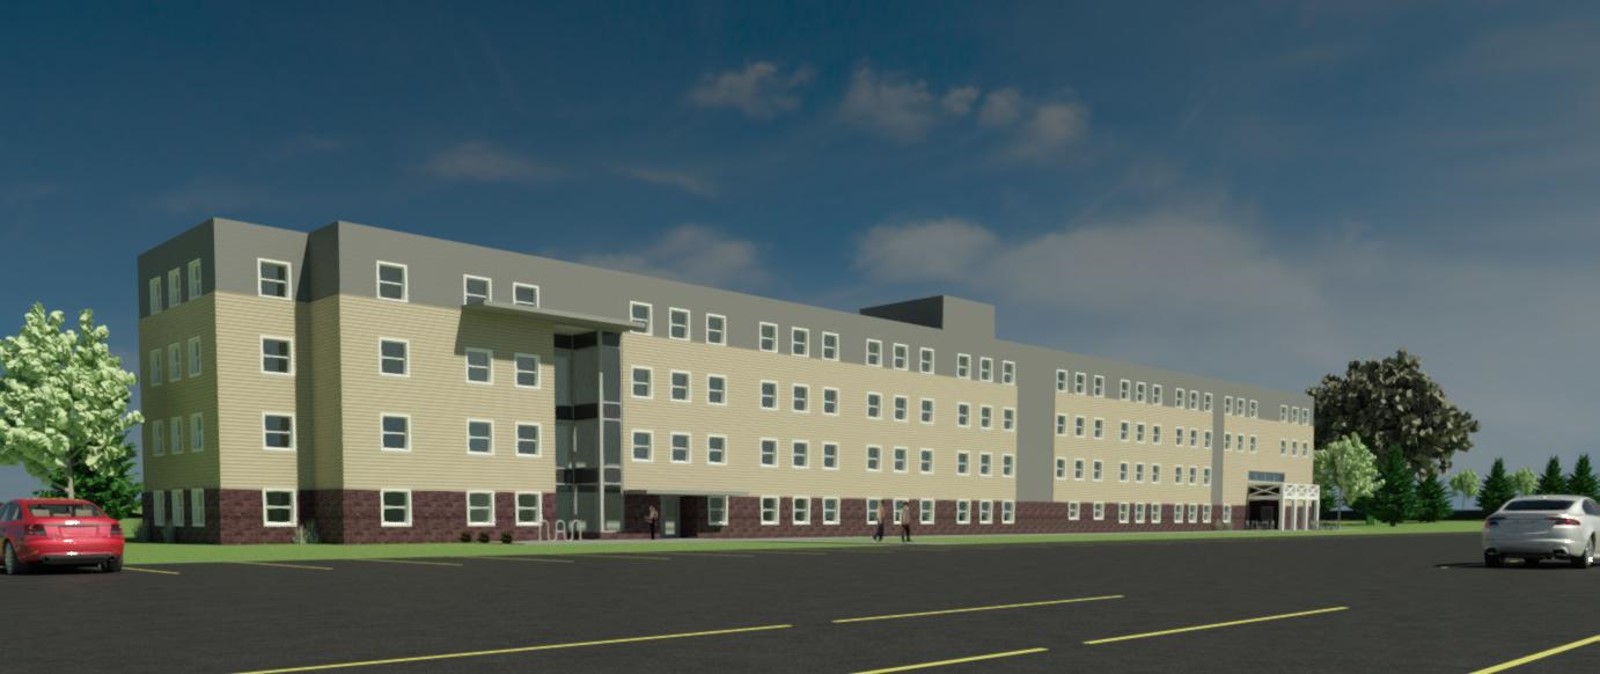 Rendering of the proposed new student housing at Alexandria College